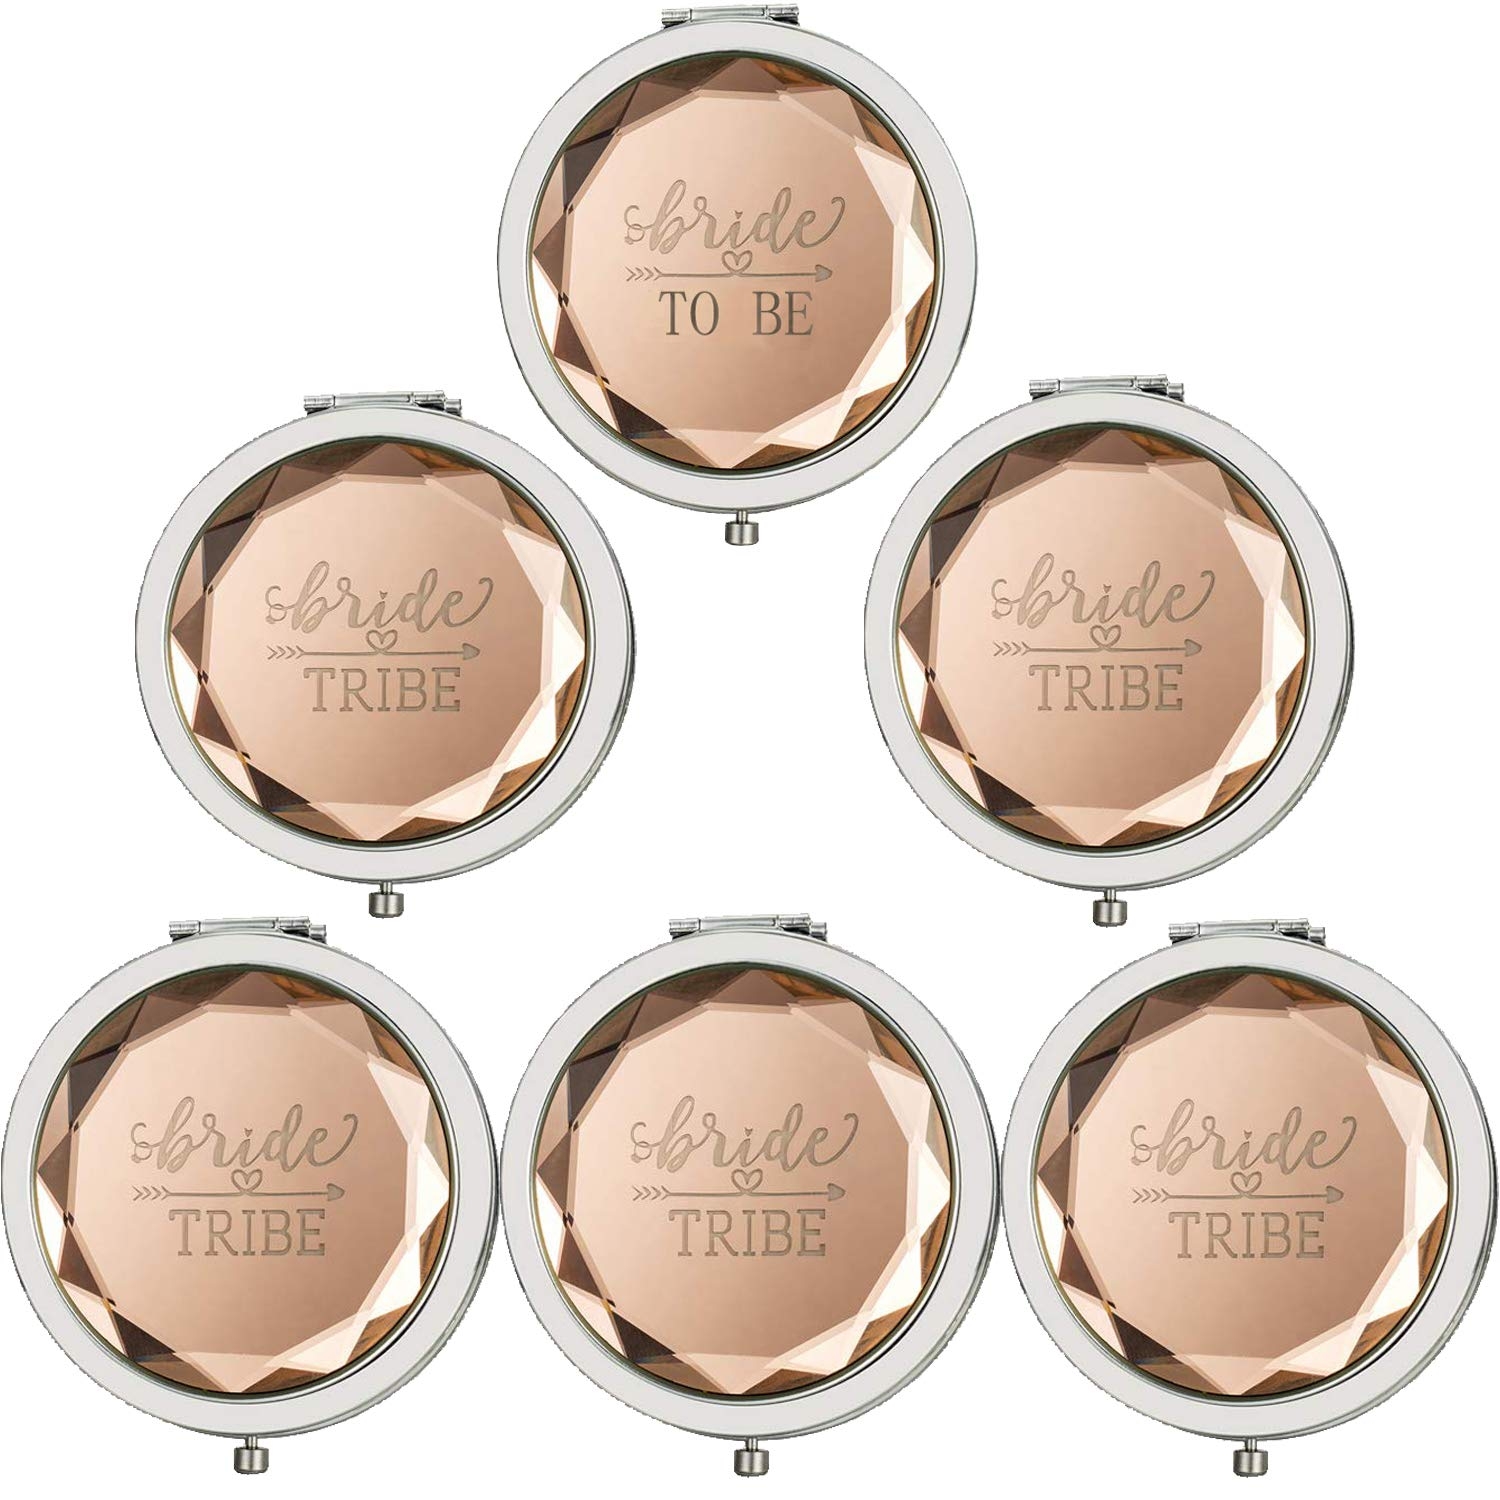 Cuterui Bridesmaid Gifts Bride Tribe Compact Makeup Mirrors for Bachelorette Bridal Shower Gifts(Pack of 6,Champagne)